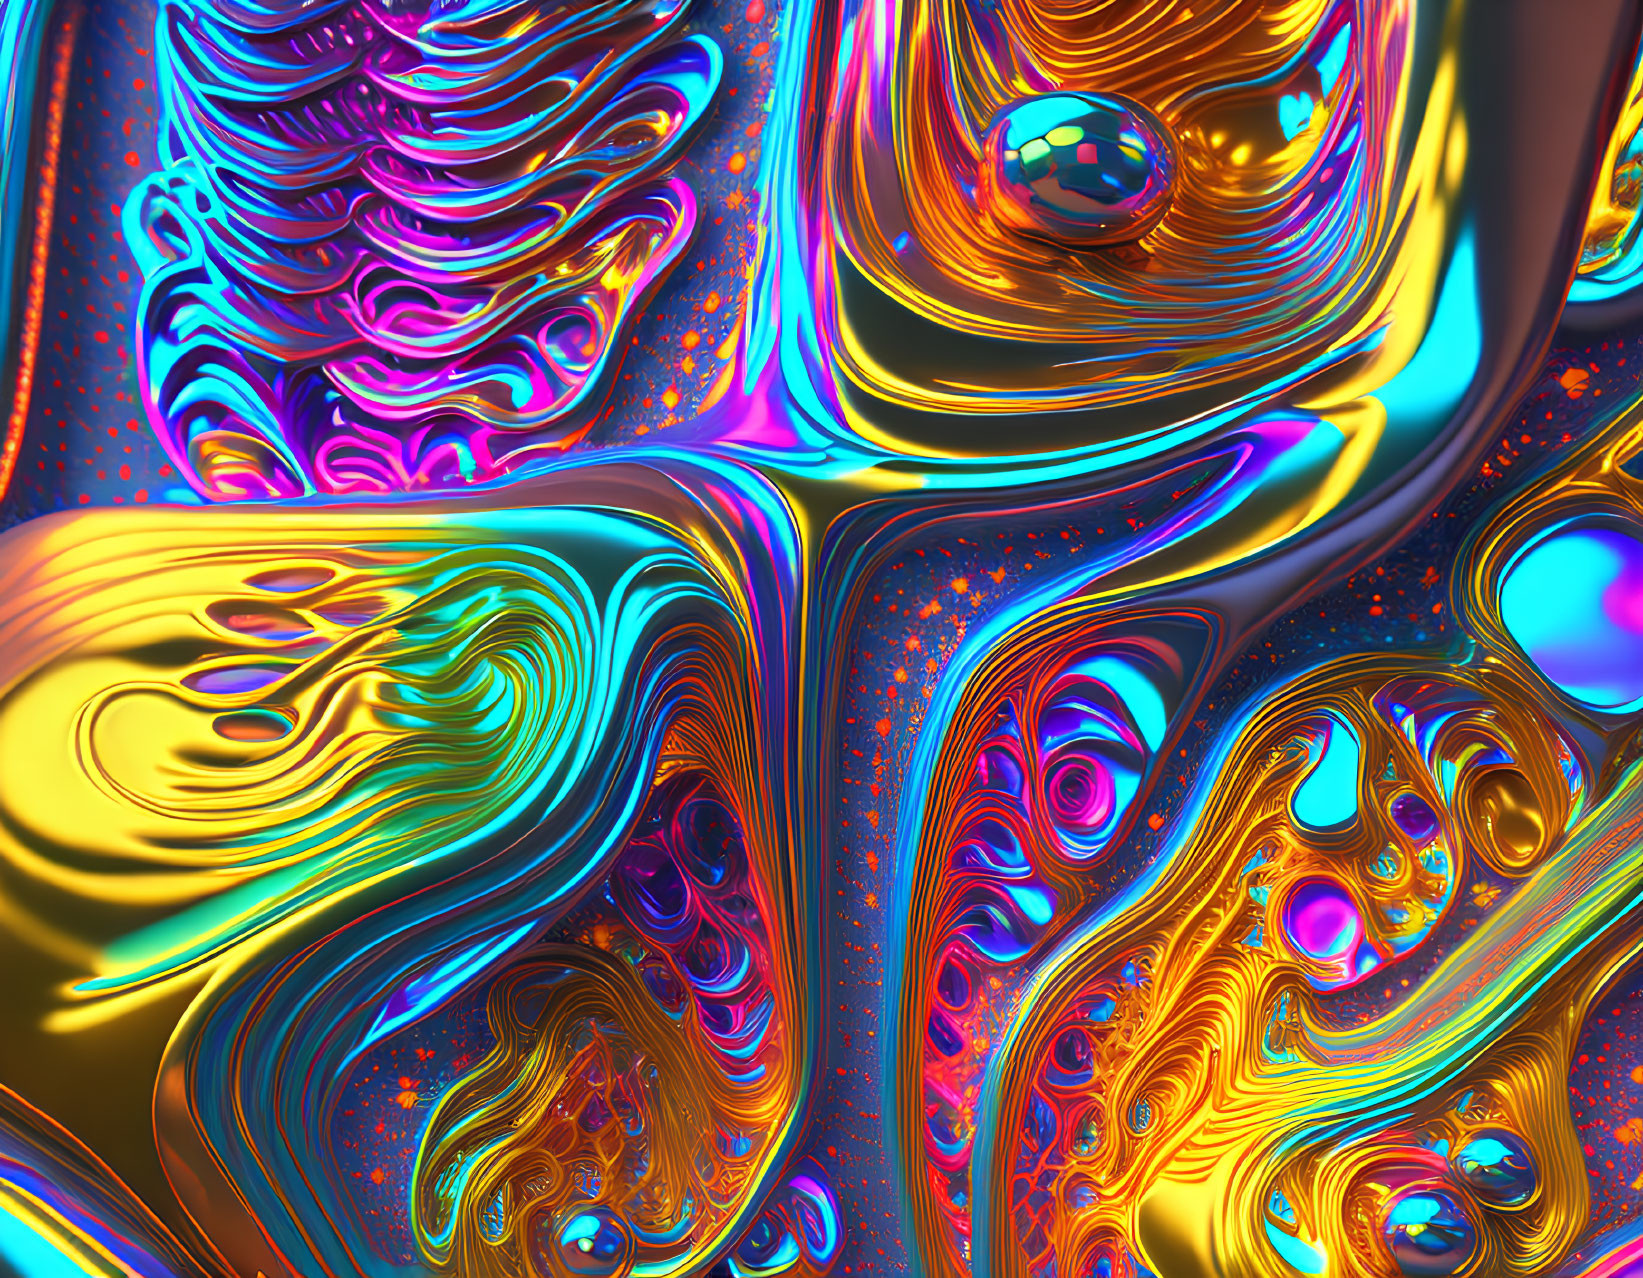 Abstract digital art with vibrant swirling patterns and metallic sheen